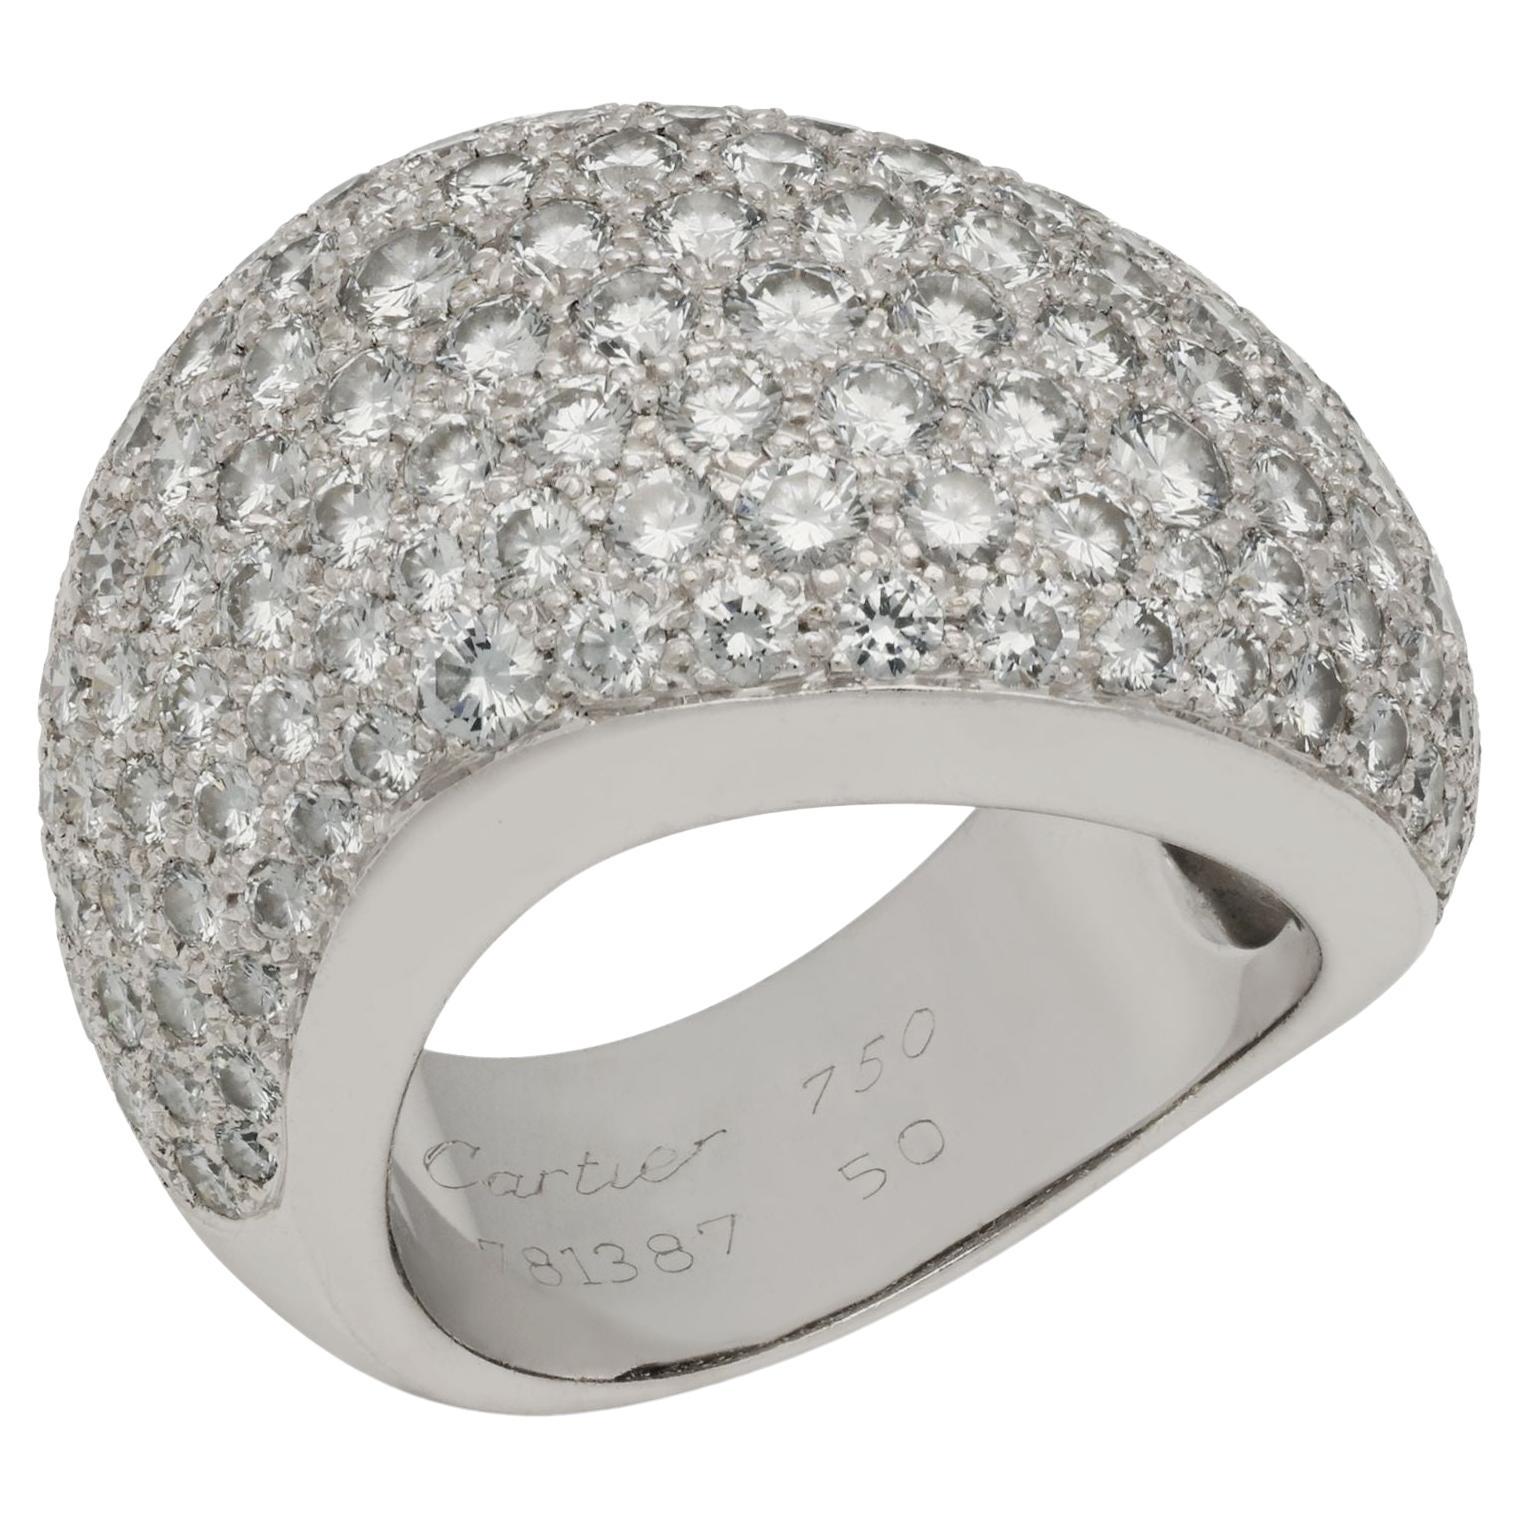 Cartier 18 Carat White Gold and Round Brilliant Diamond Dress Ring, circa 2000 For Sale